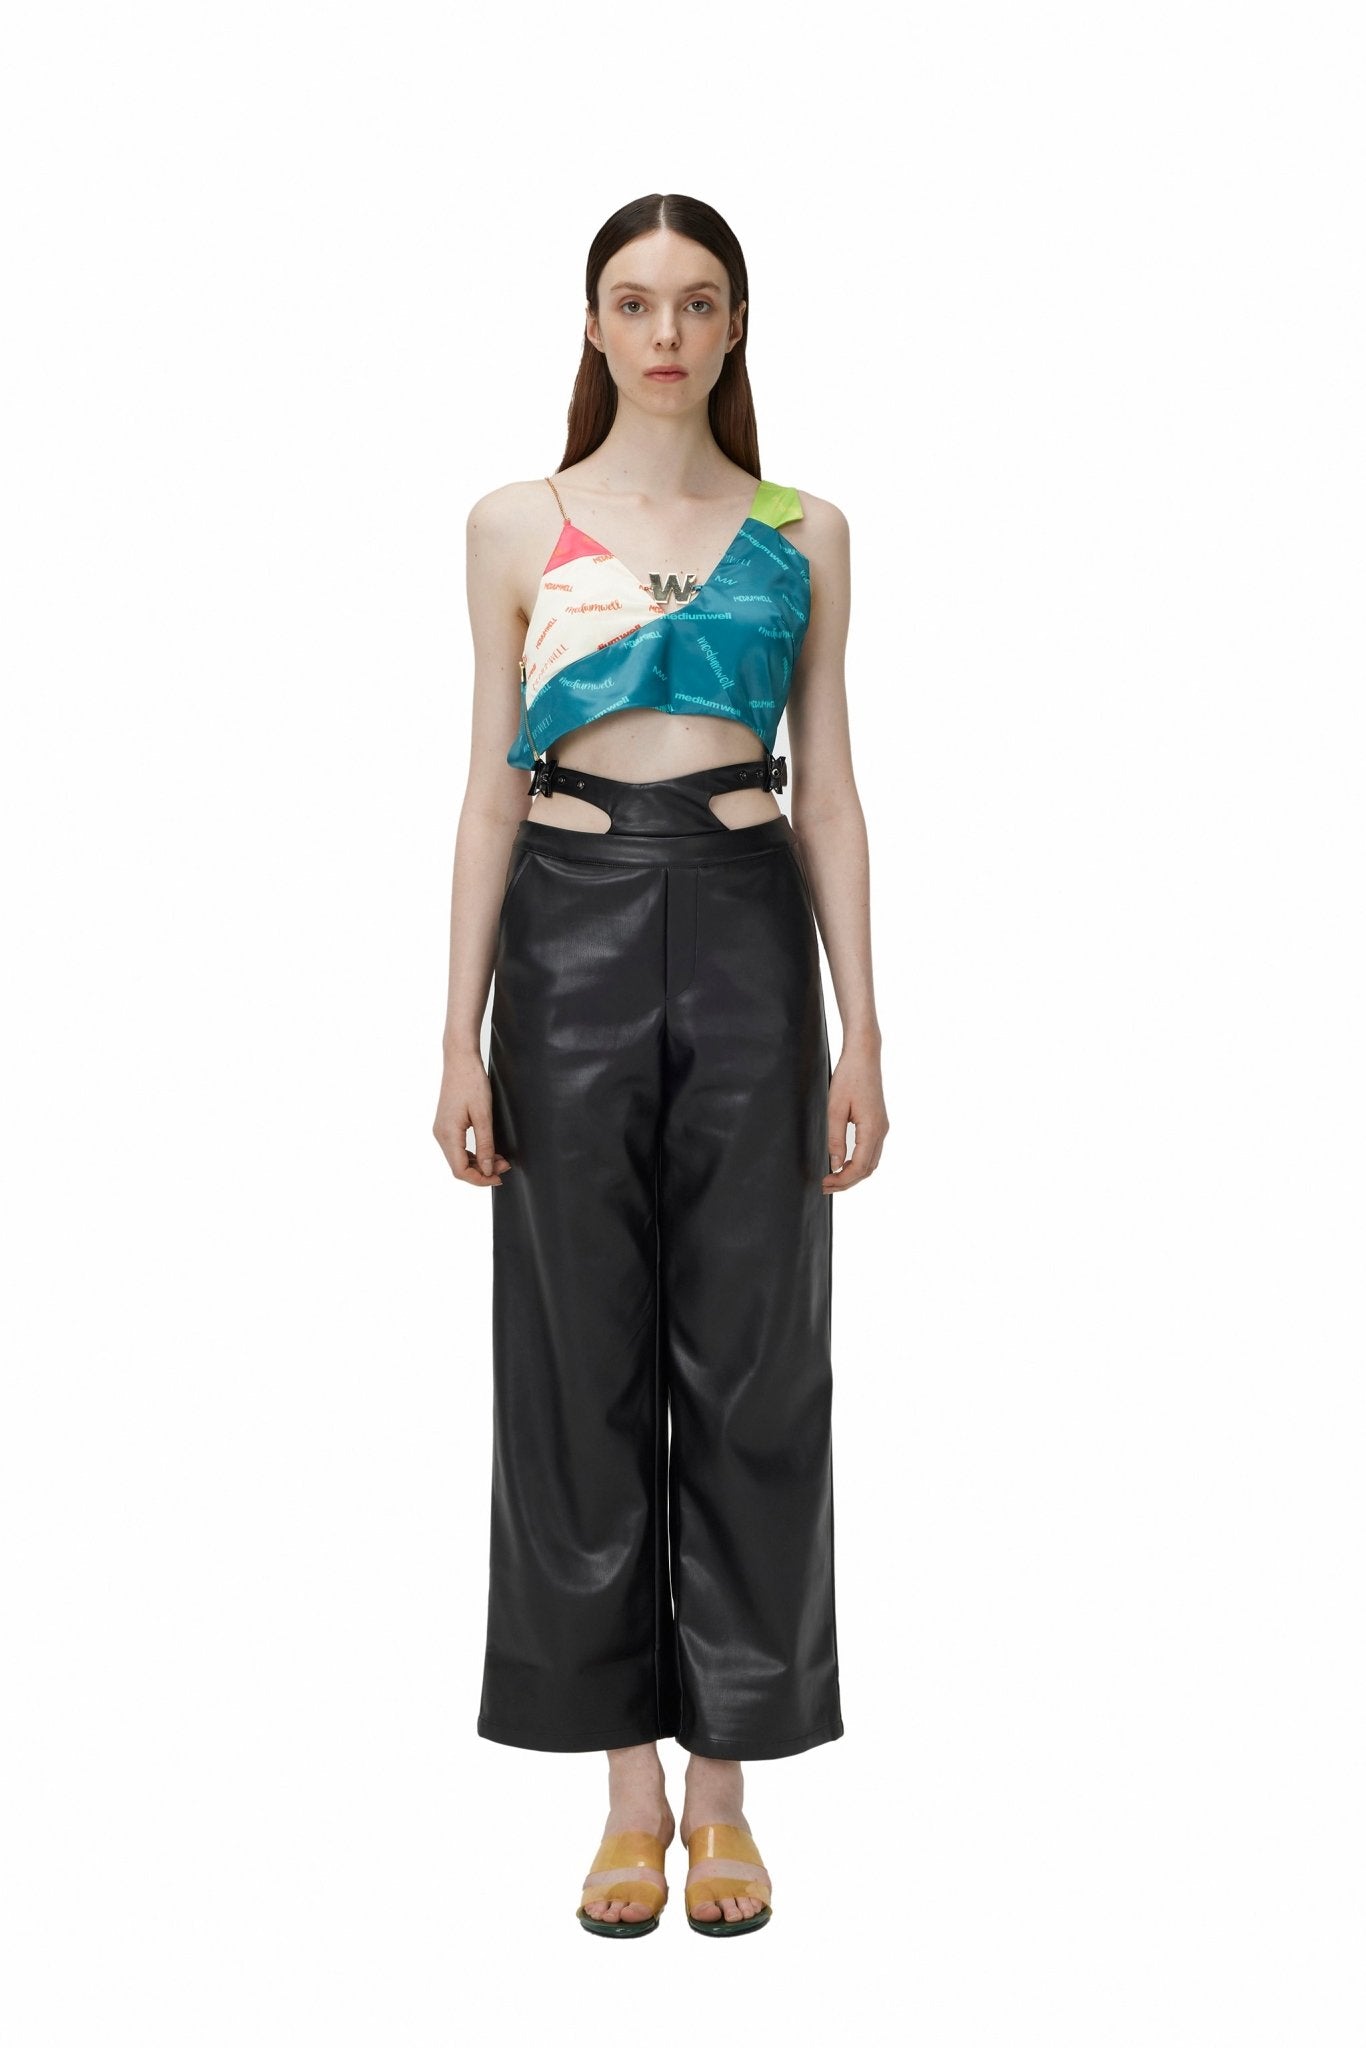 MEDIUM WELL Functional Leather Wide Leg Pants | MADA IN CHINA